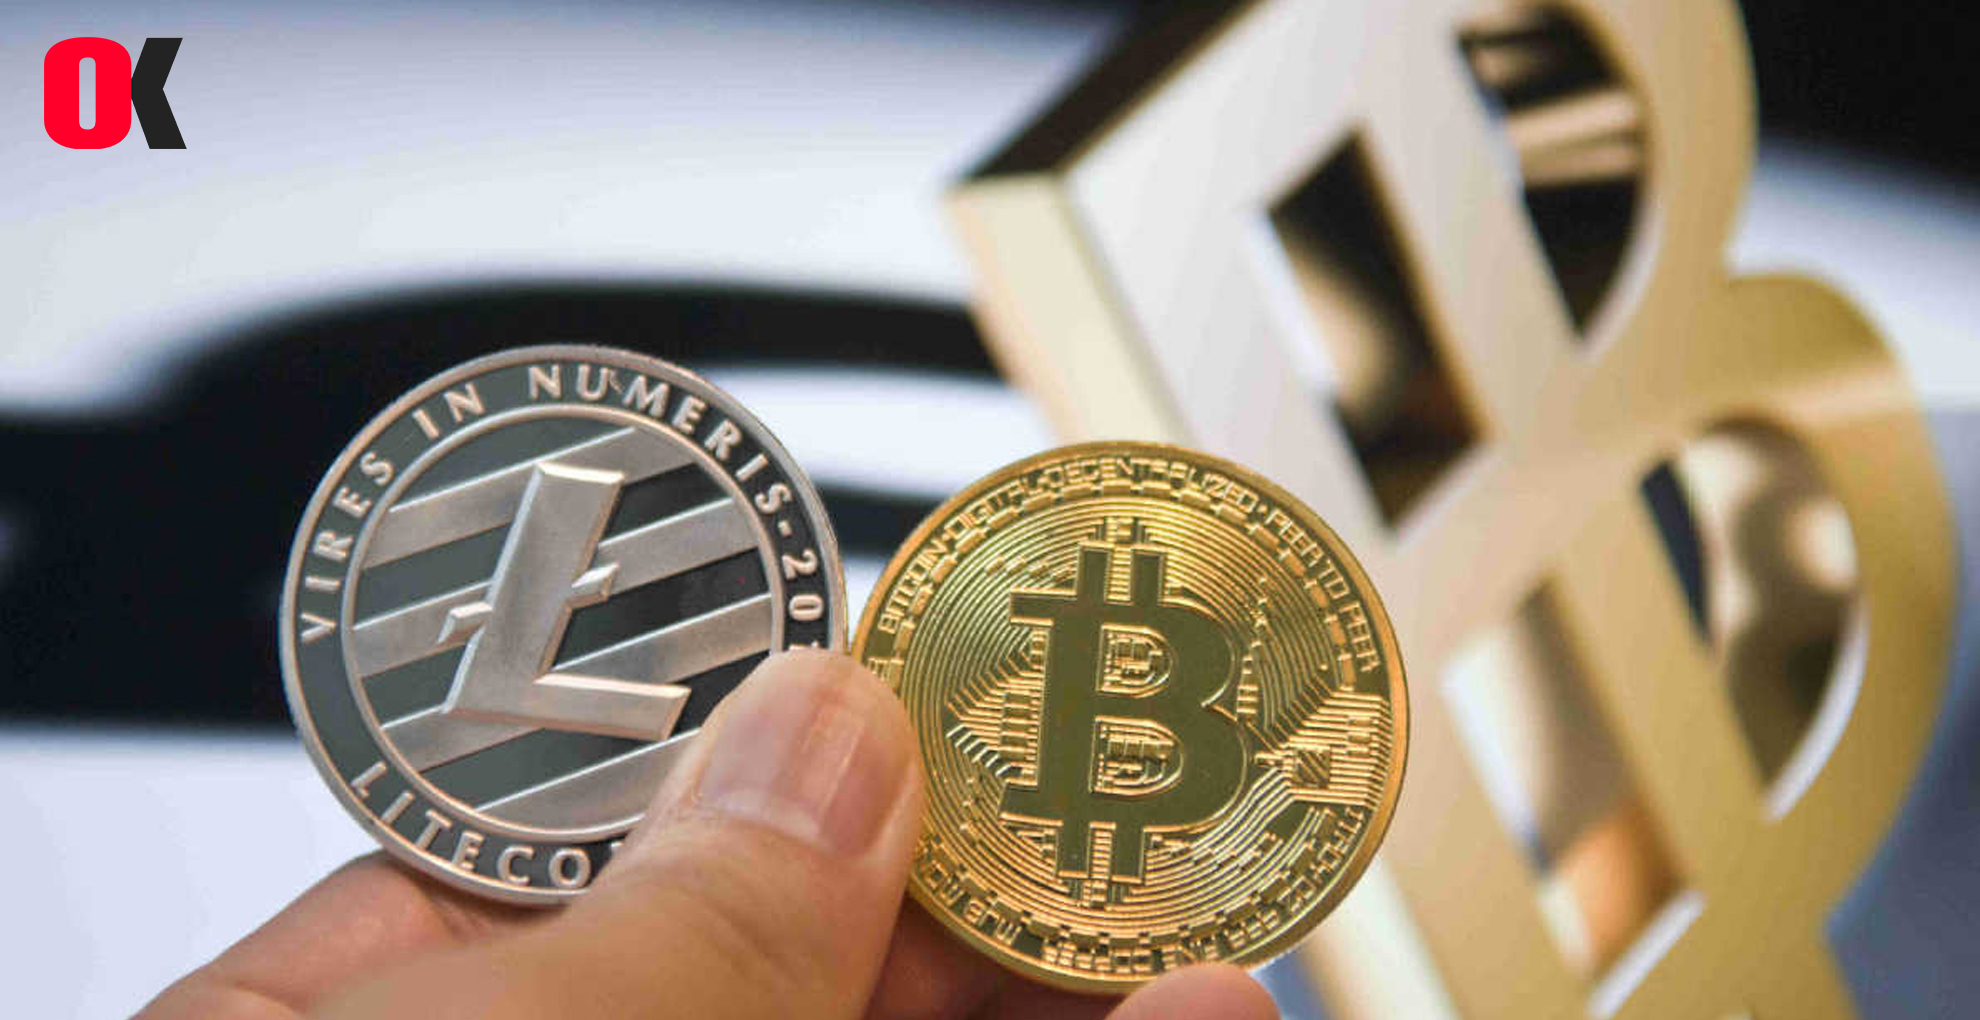 Virtual currency faces more regulation